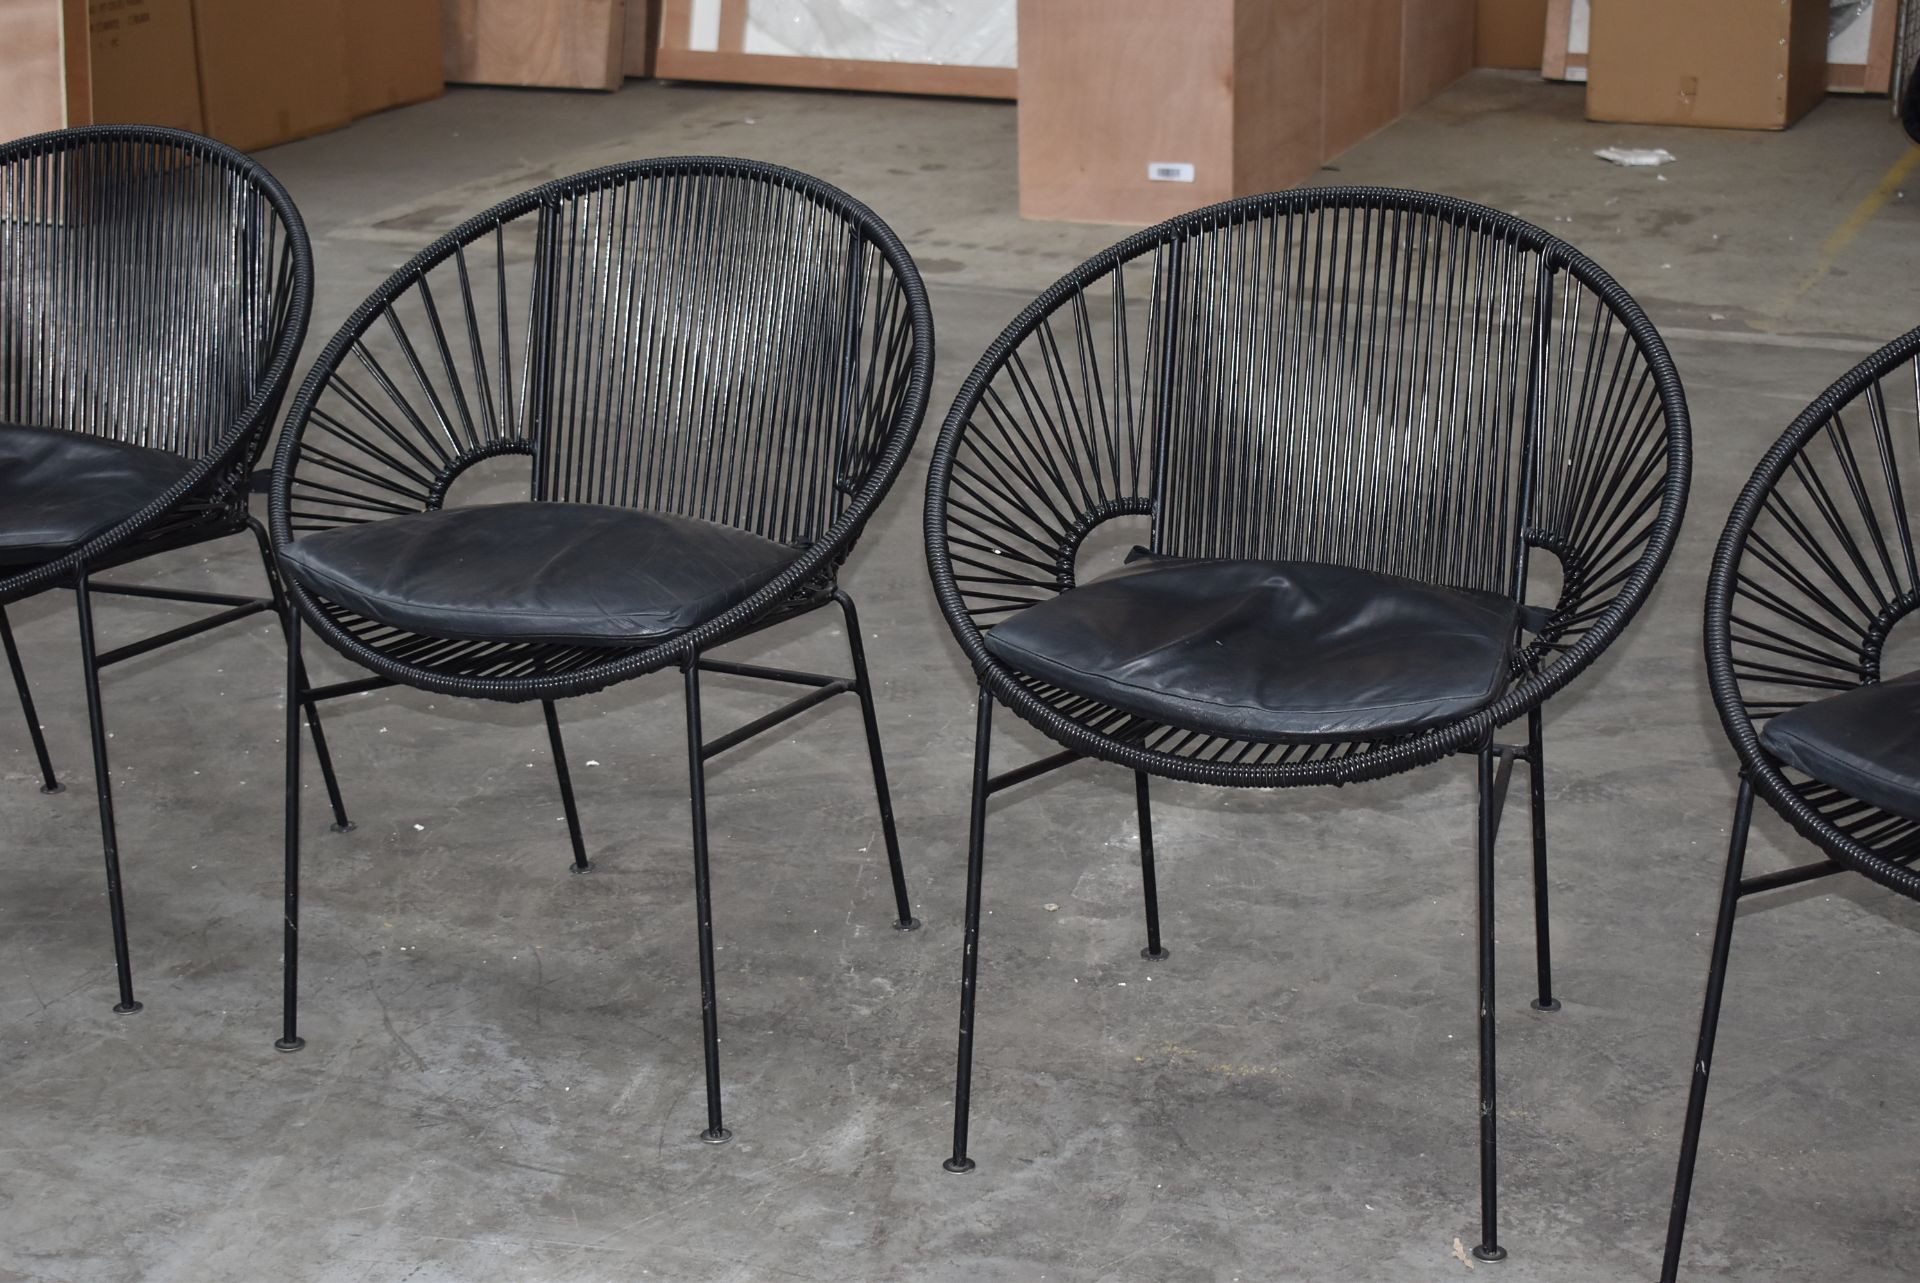 4 x Innit Designer Chairs - Acapulco Style Chairs in Black Suitable For Indoor or Outdoor Use - - Image 9 of 10